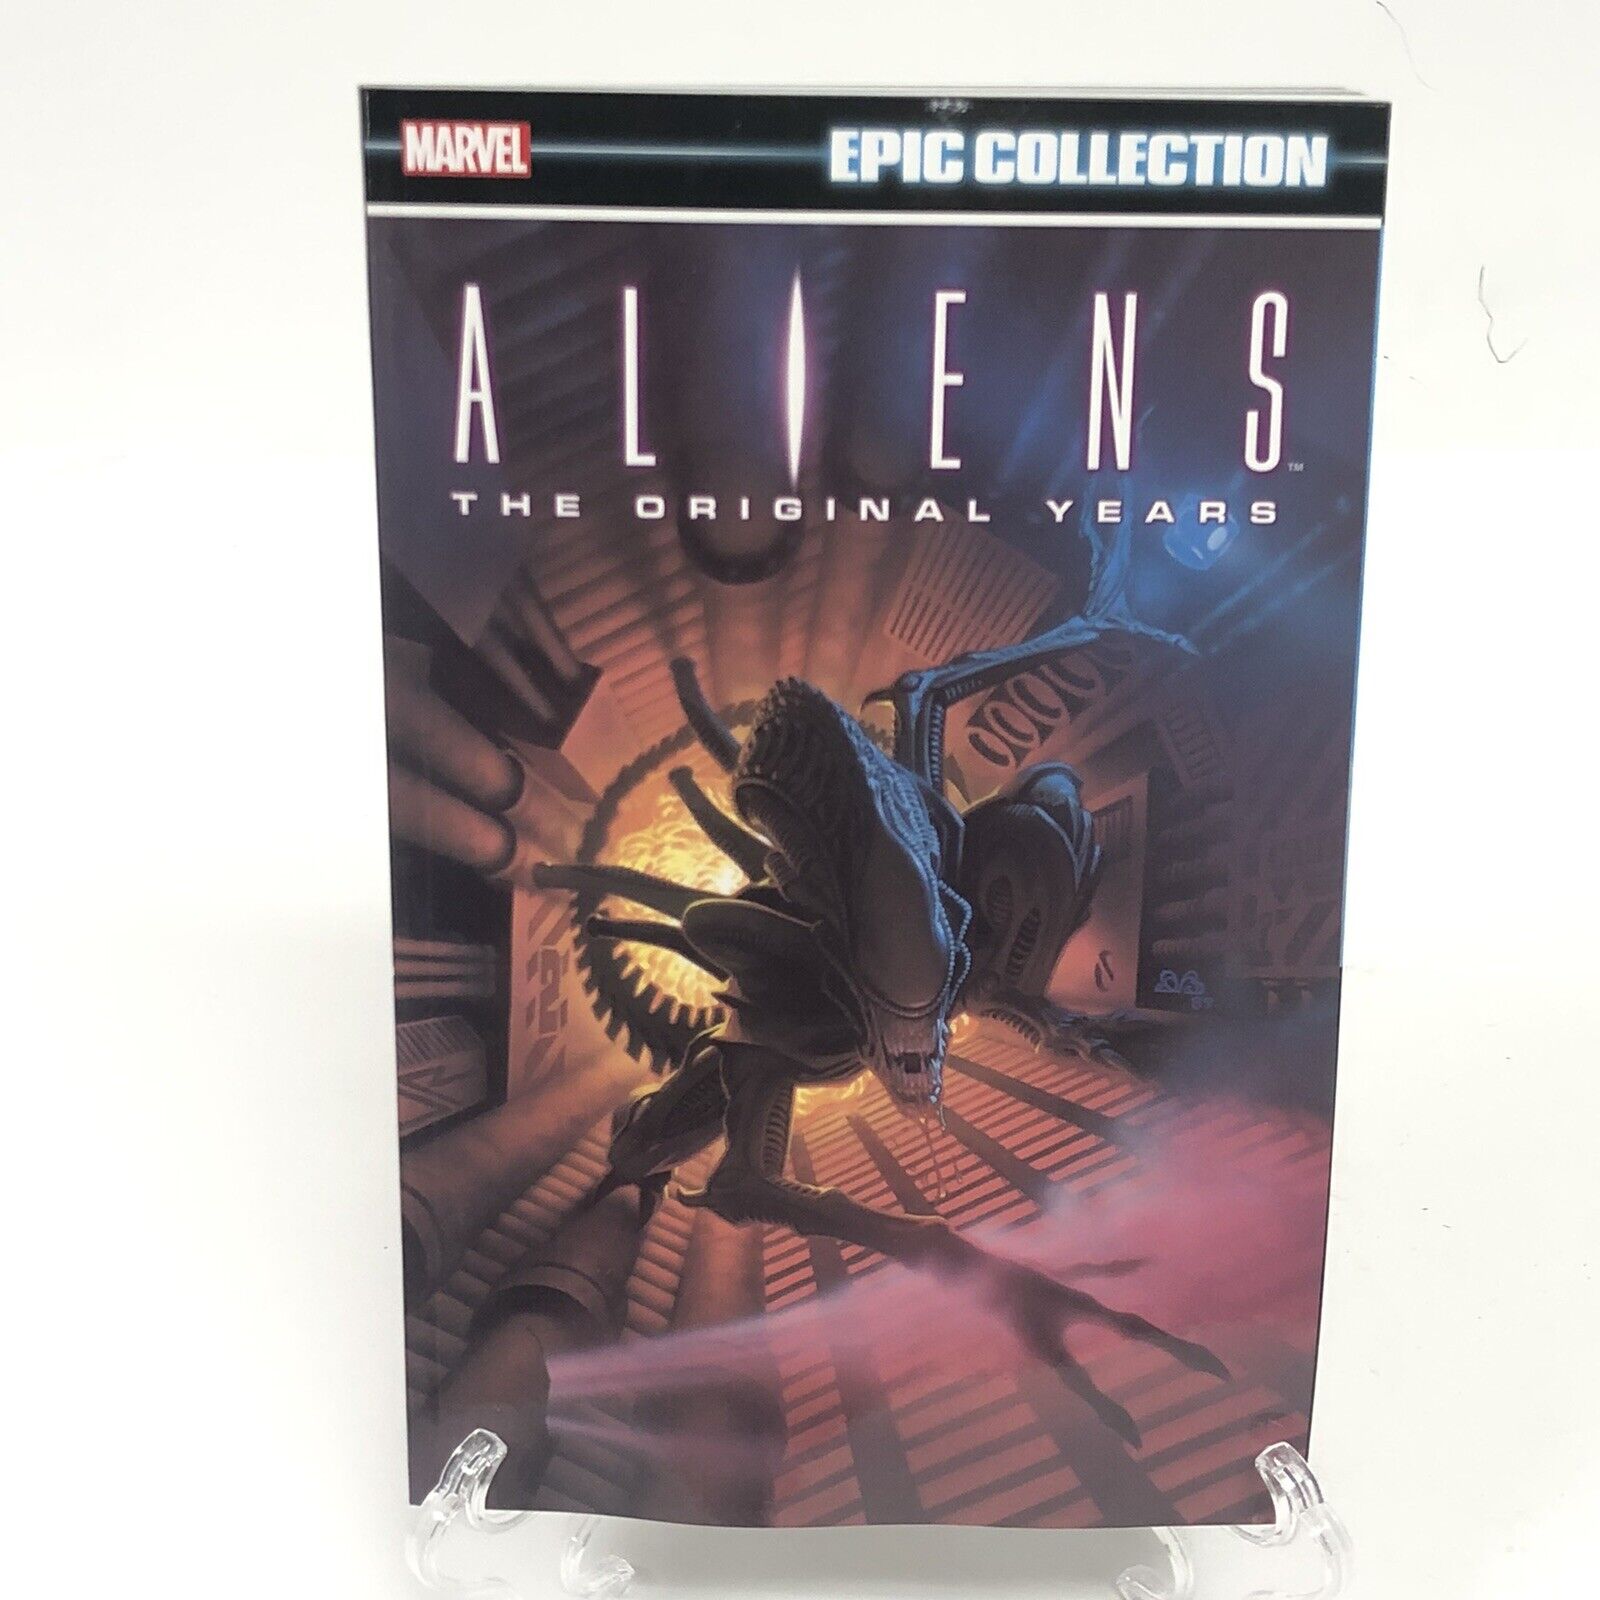 Aliens Original Years Epic Collection Vol 1 New Marvel Comics TPB Paperback